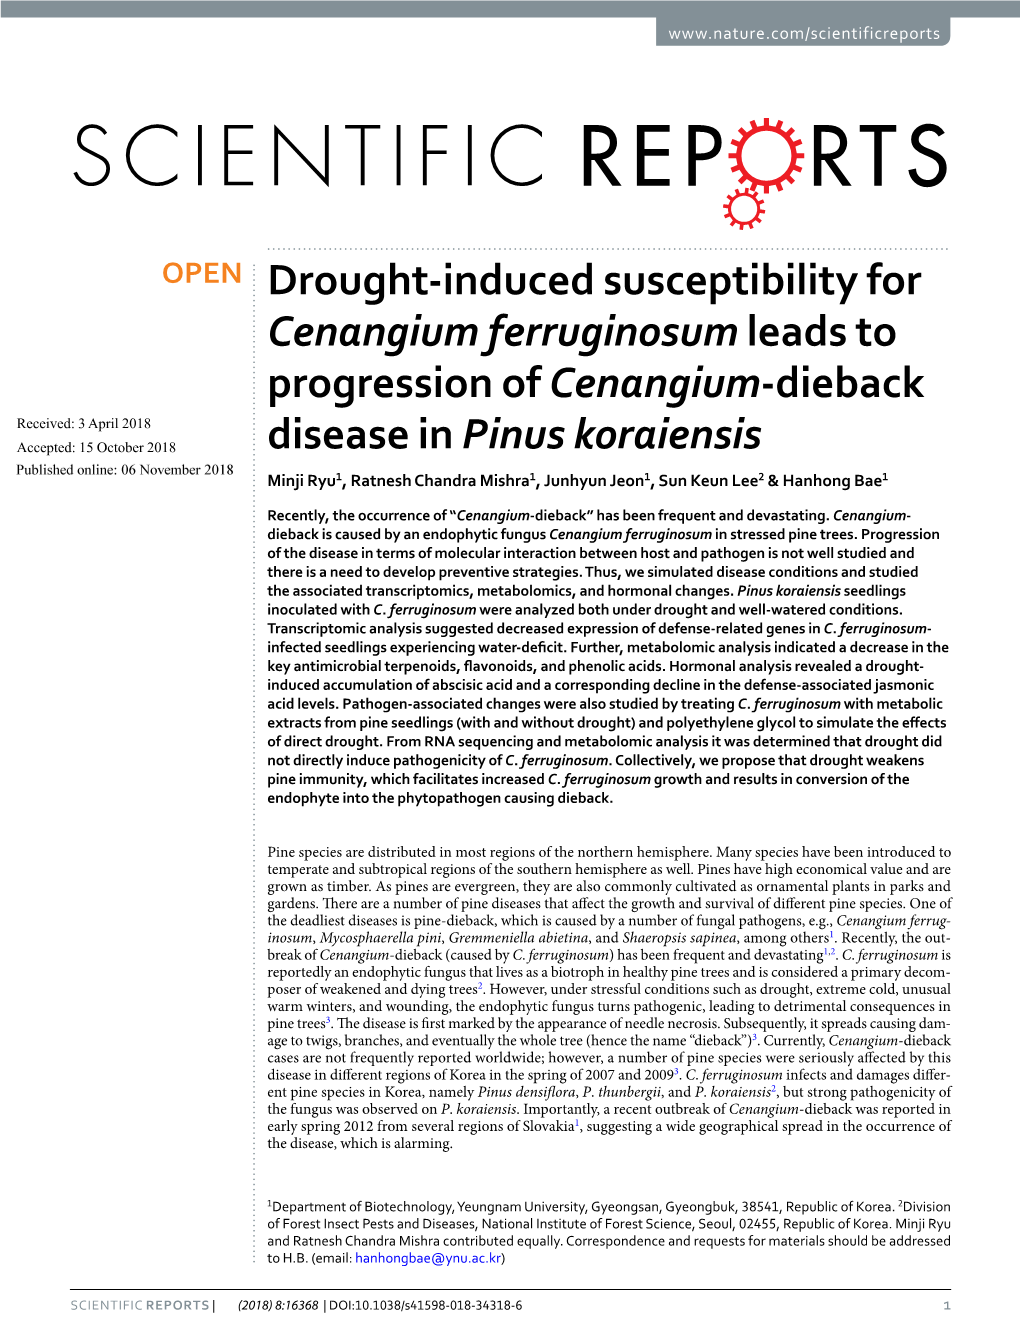 Drought-Induced Susceptibility for Cenangium Ferruginosum Leads To